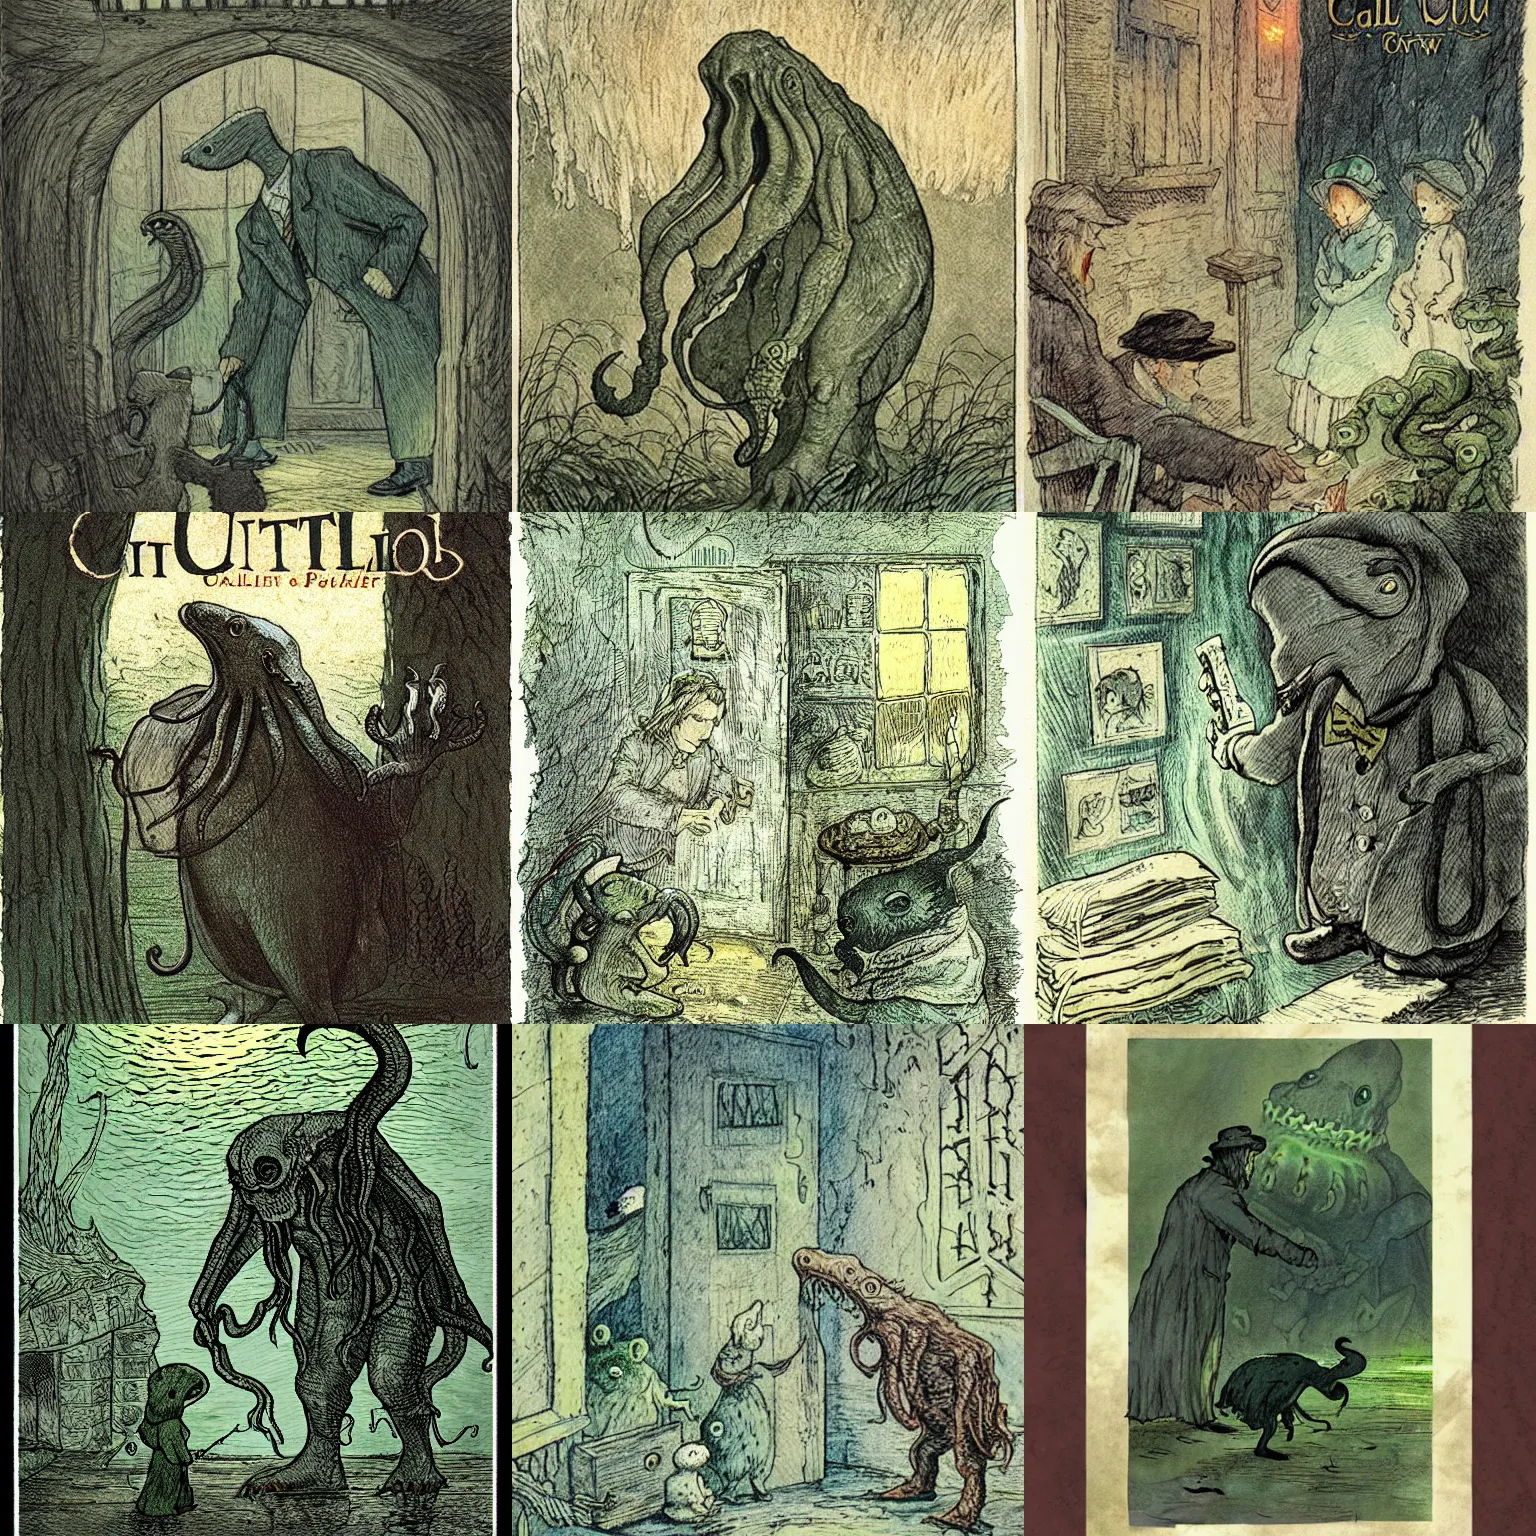 Prompt: call of cthulhu illustrated by beatrix potter